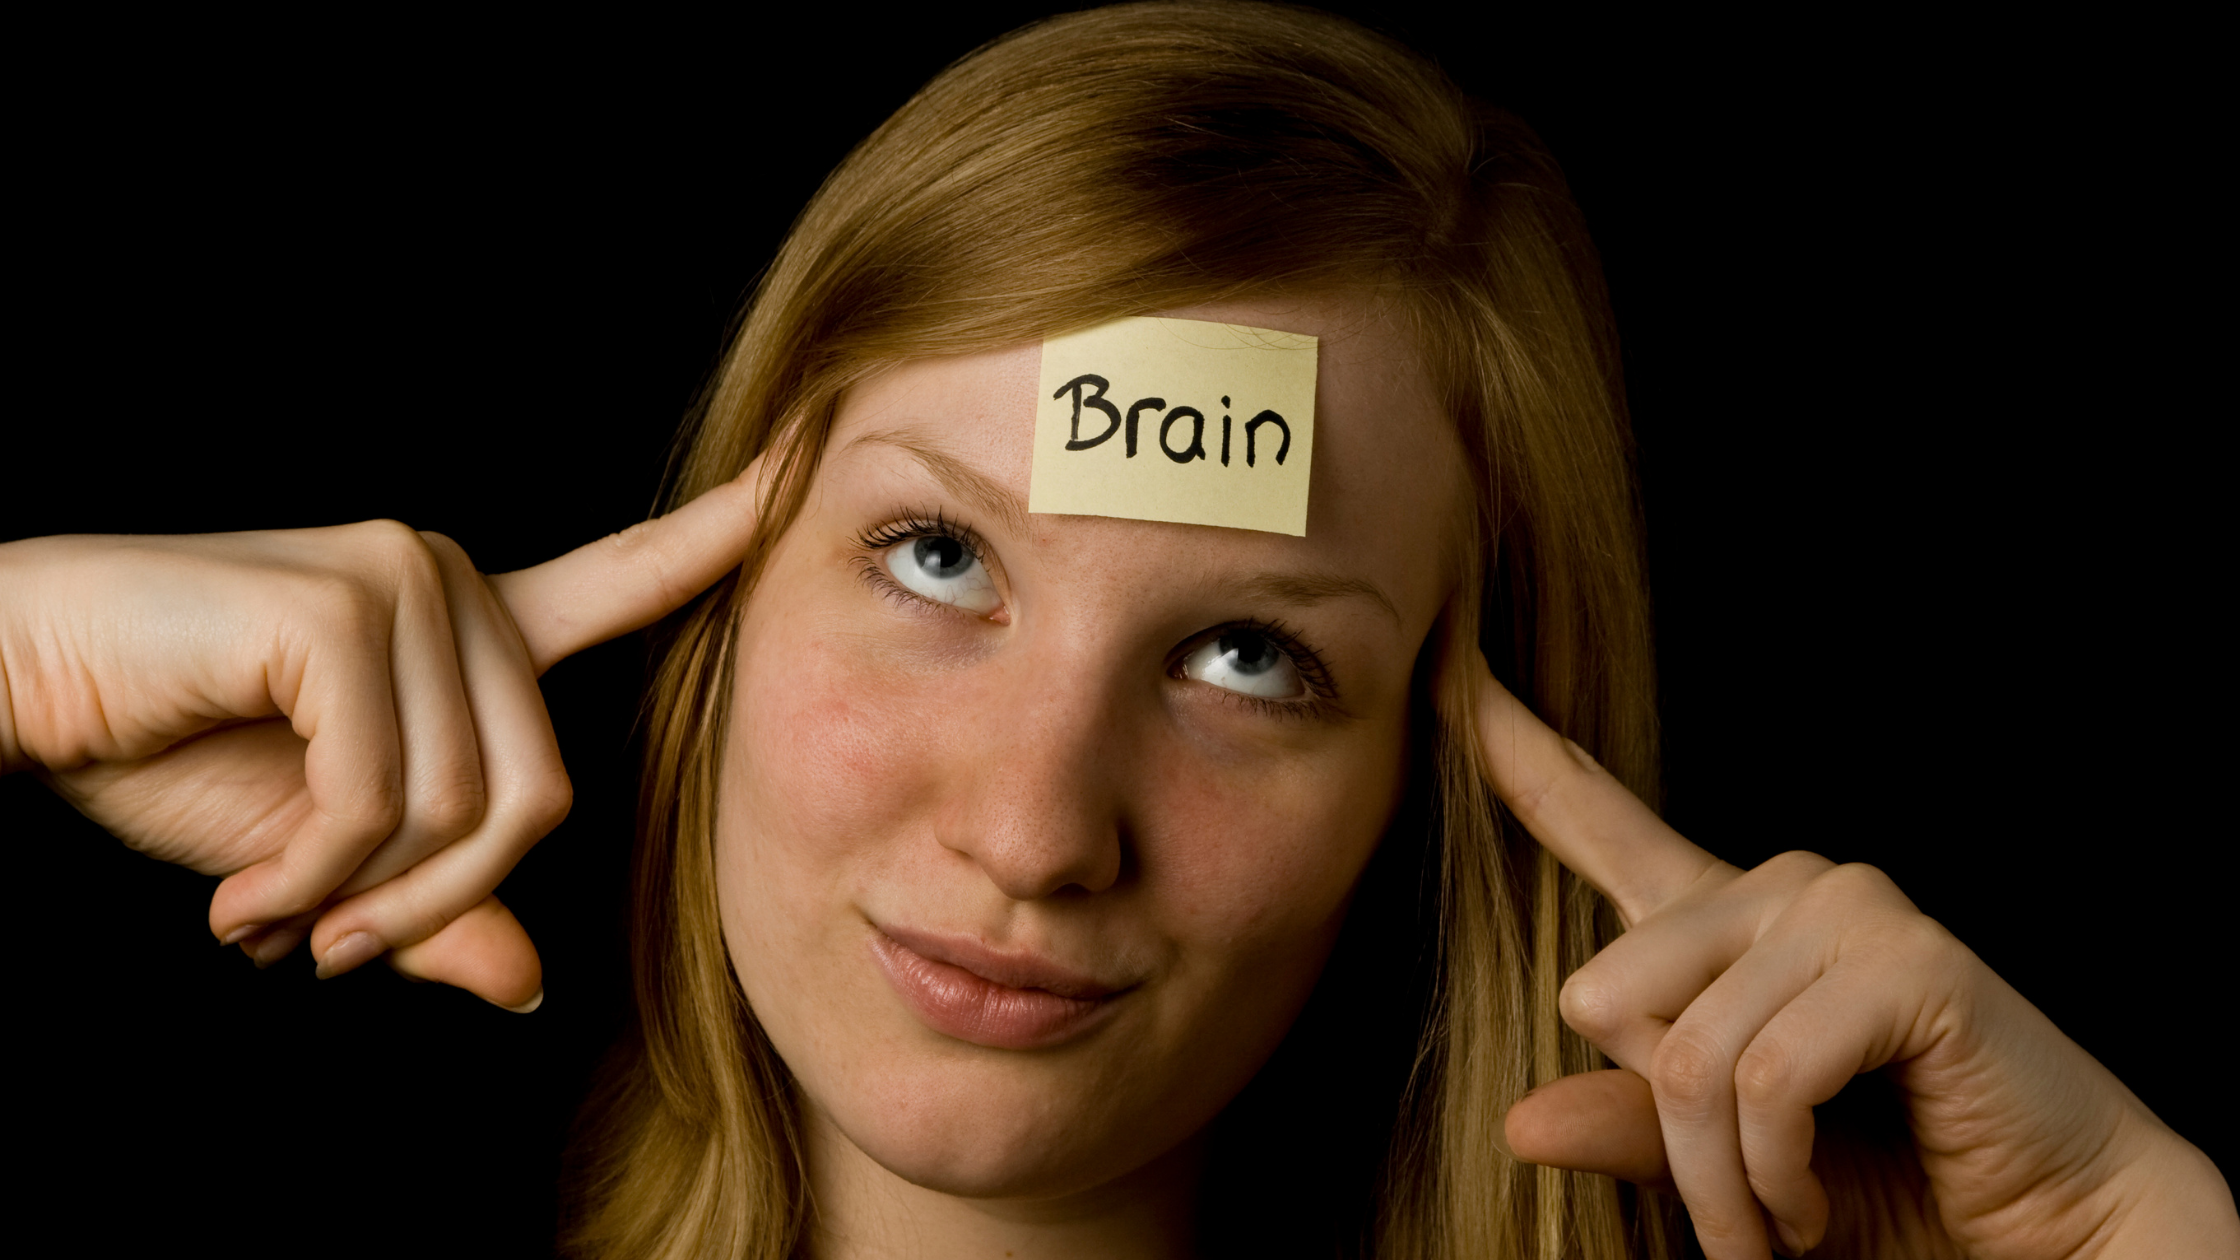 Woman with sticky note on her forehead that reads, "Brain", points at her head